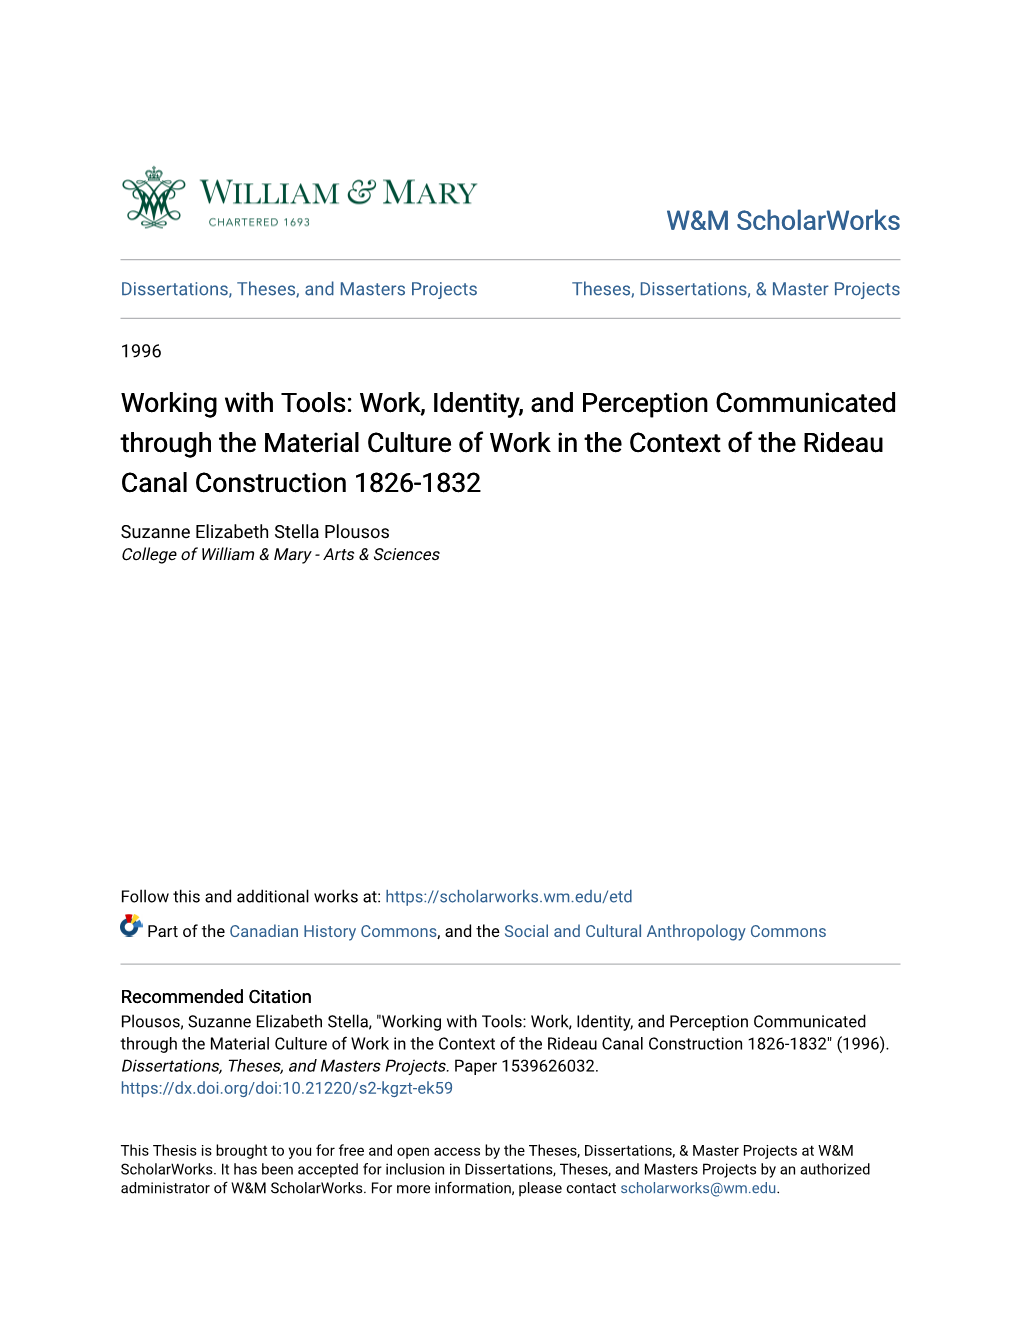 Working with Tools: Work, Identity, and Perception Communicated Through the Material Culture of Work in the Context of the Rideau Canal Construction 1826-1832